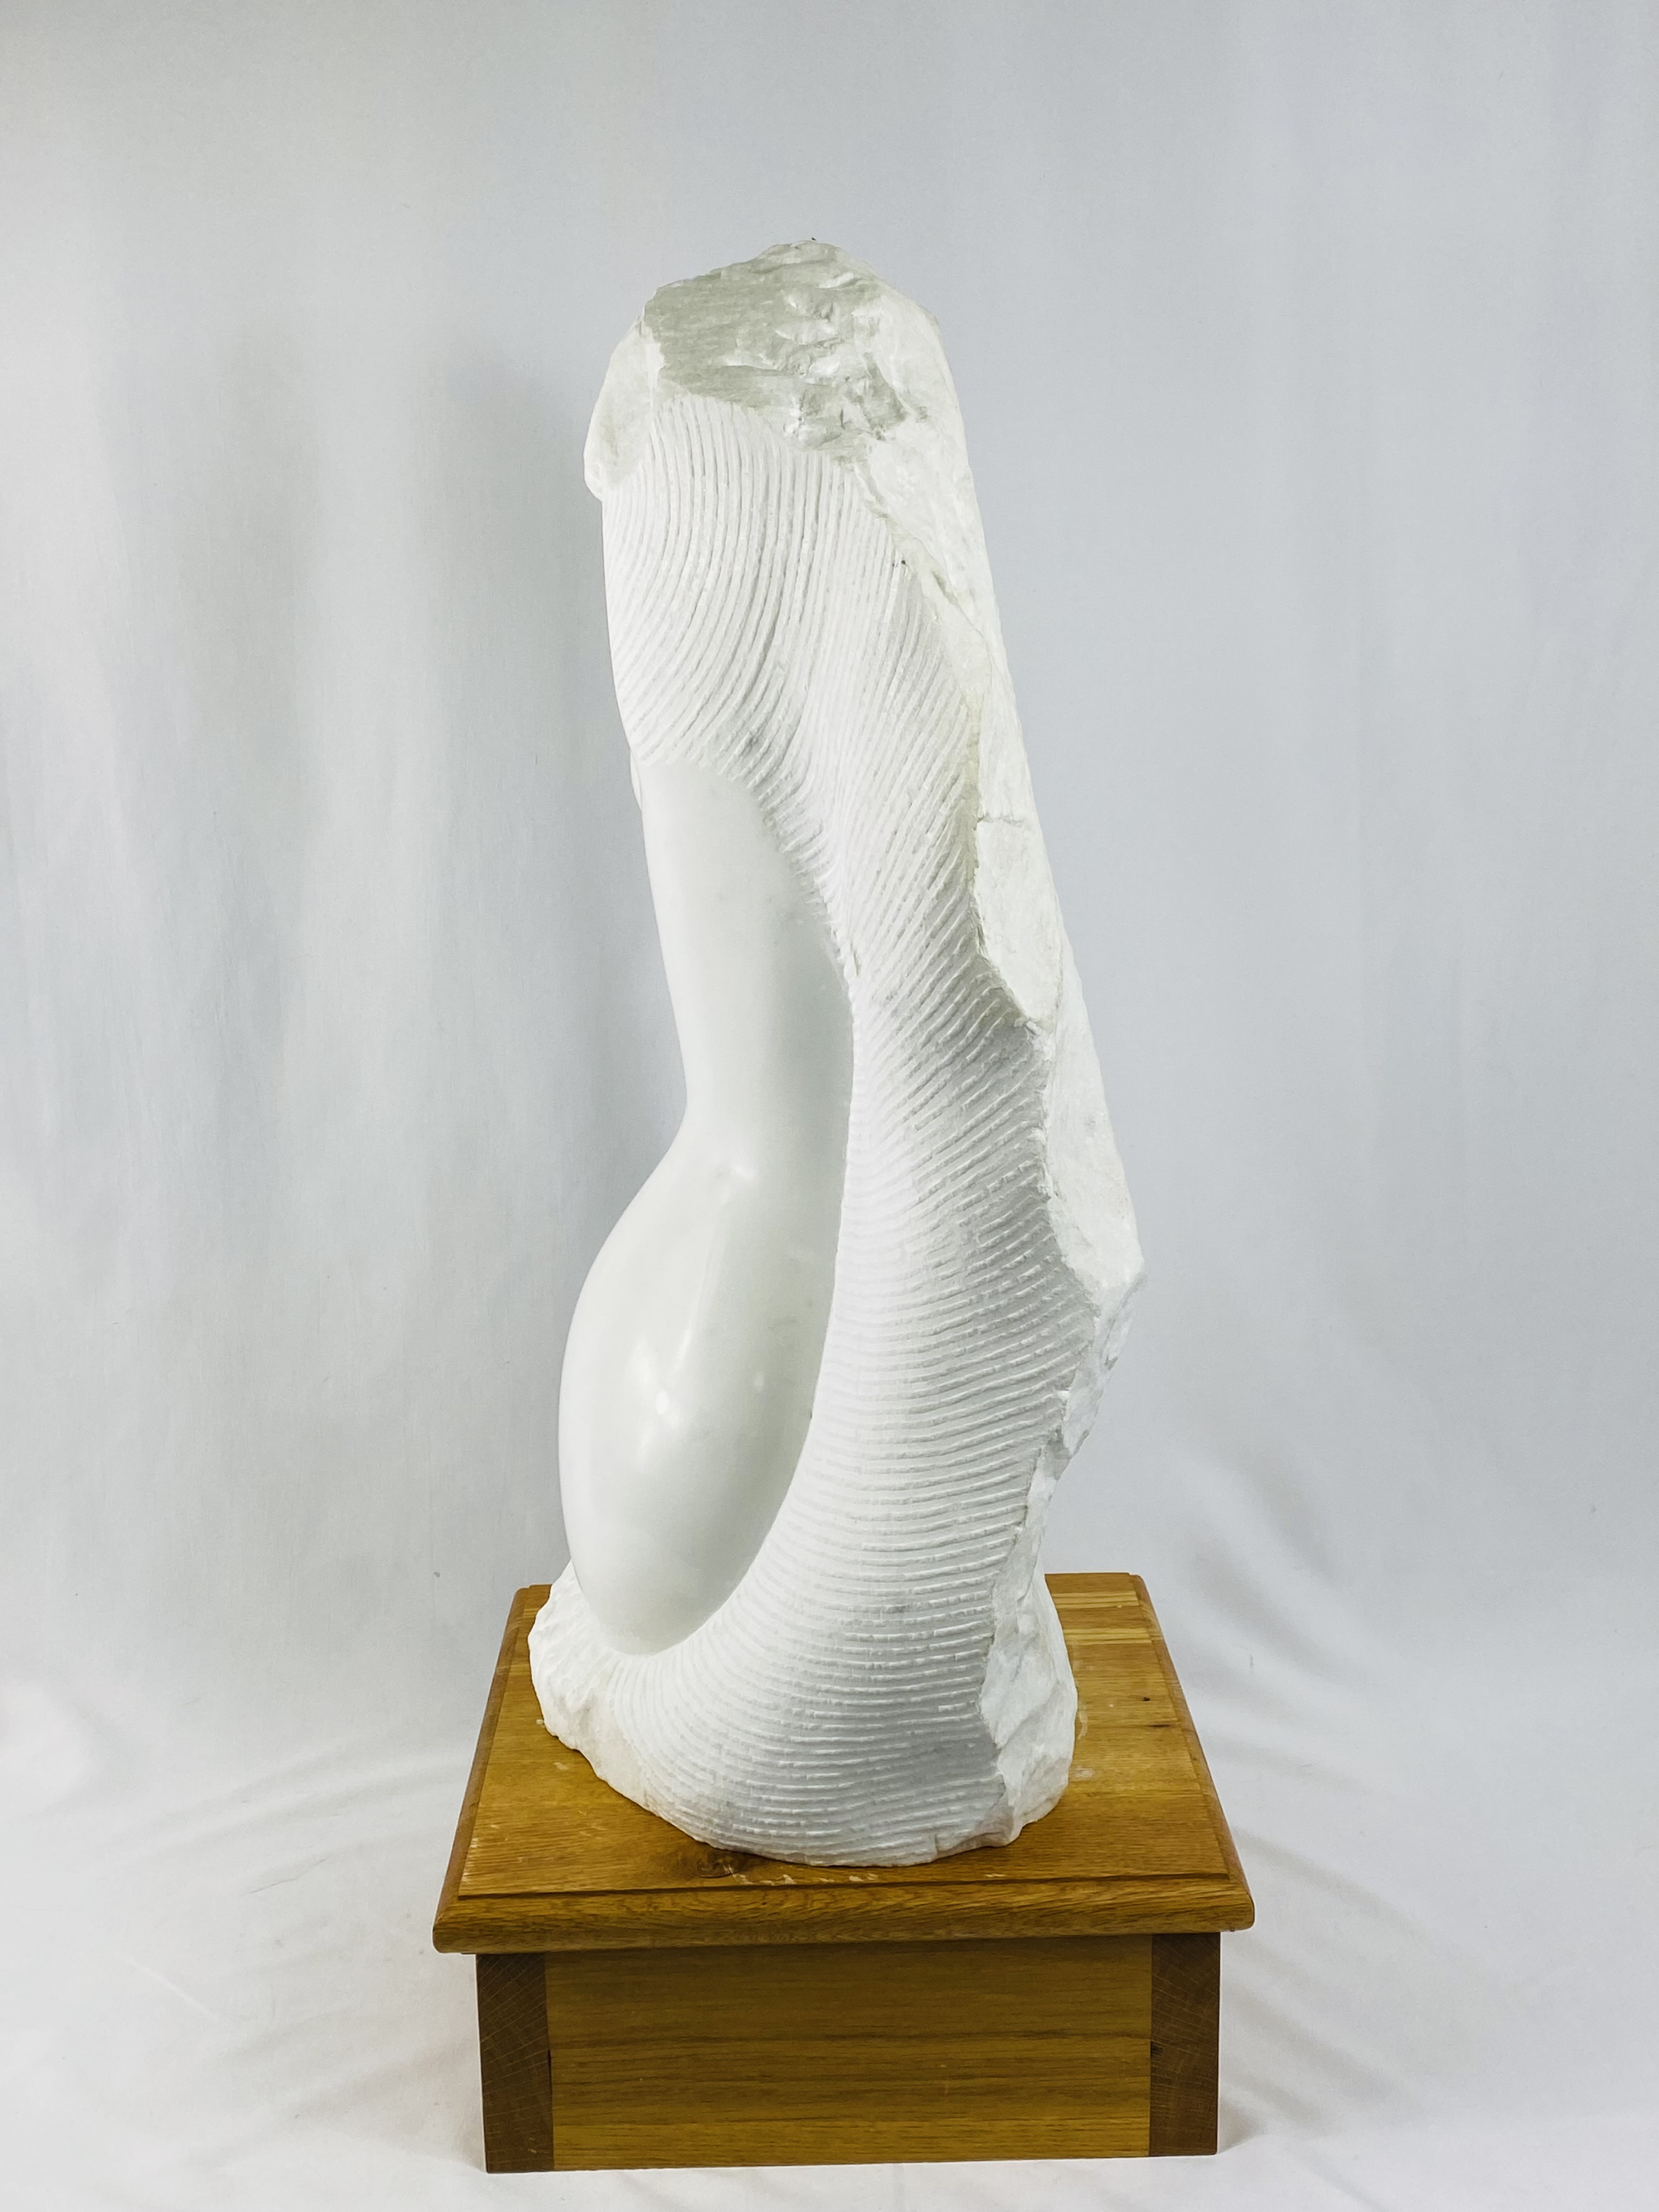 Marble sculpture of female nude torso with signature - Image 6 of 11